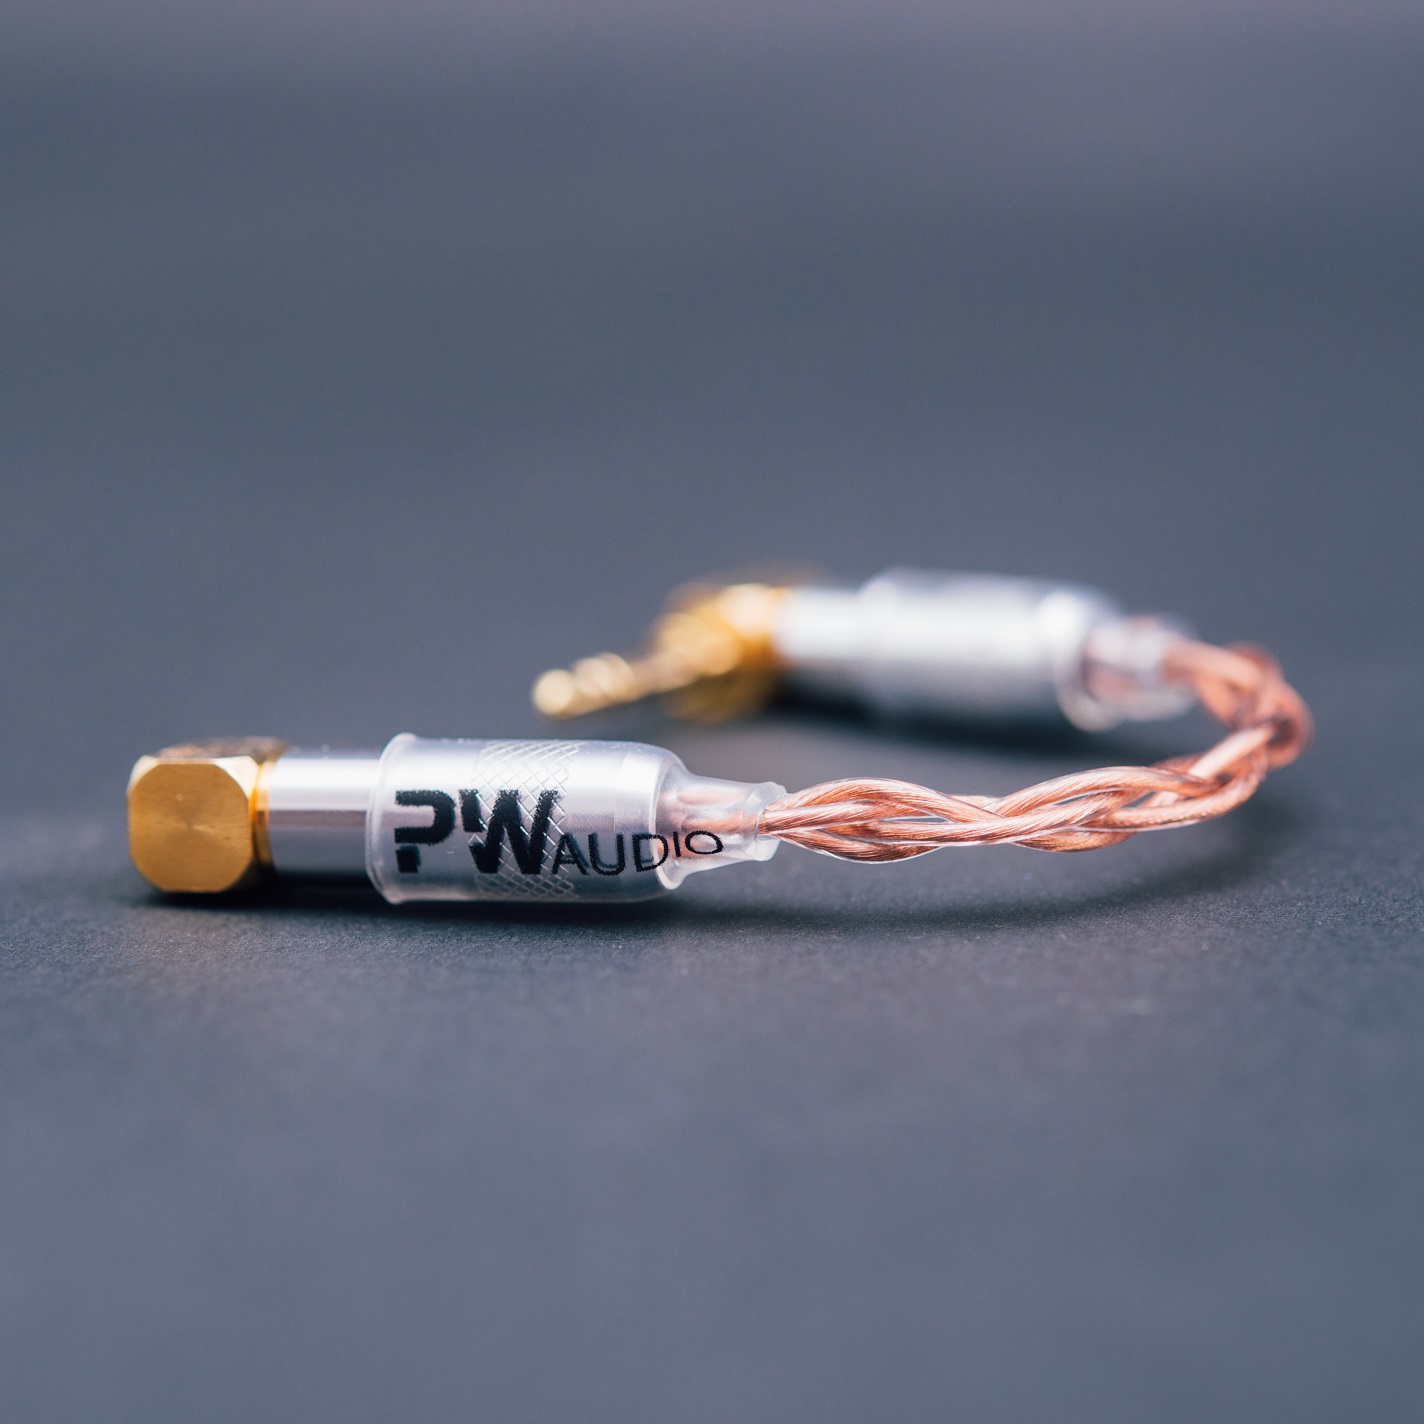 PWaudio IC No.5 3.5mm with 4wires